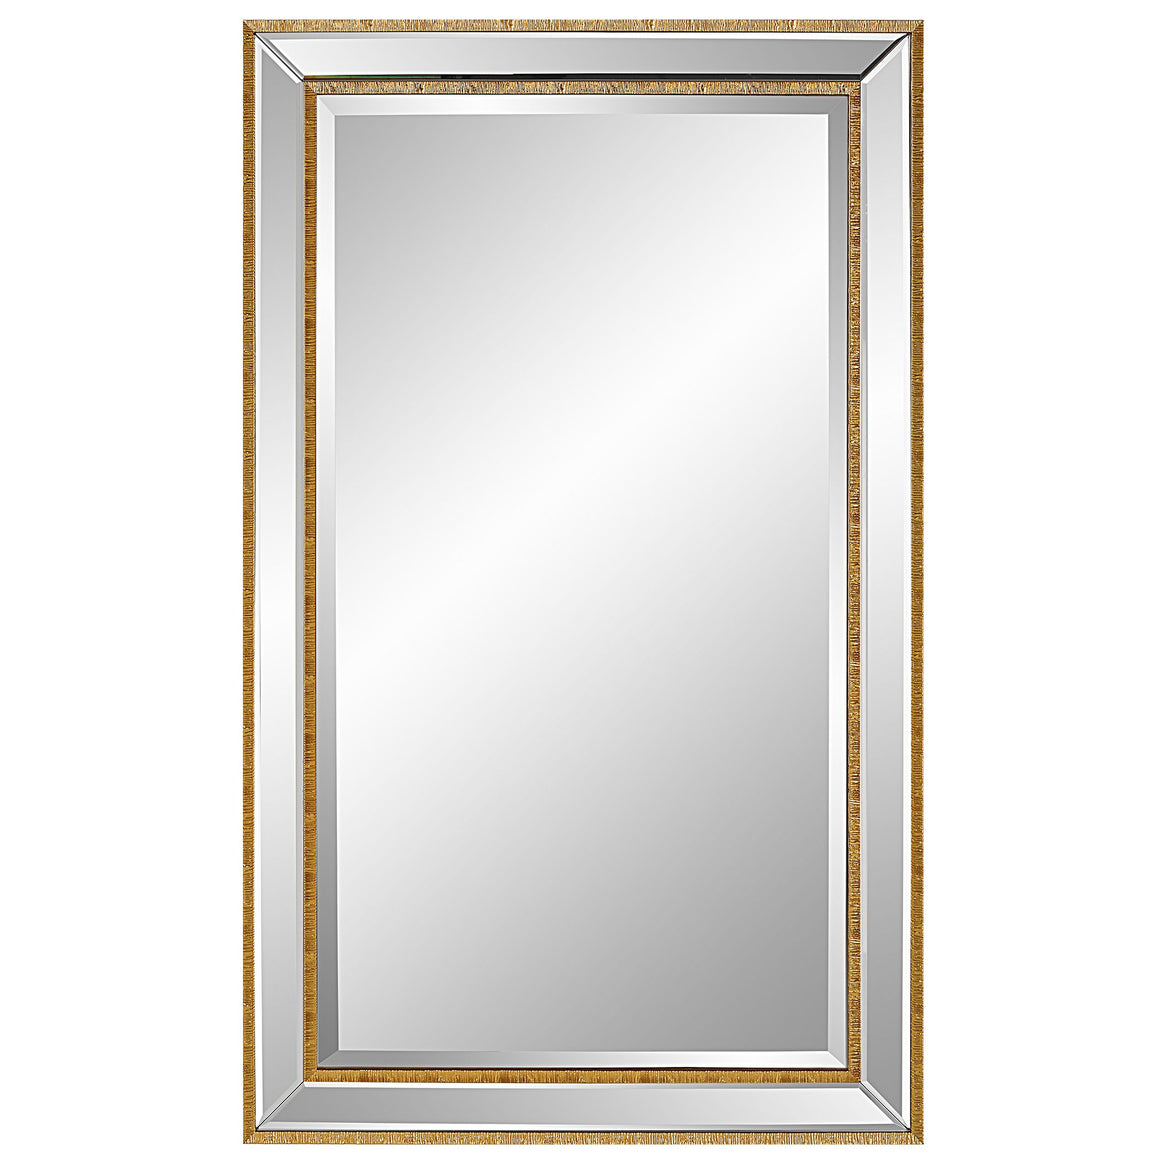 Textured Outer Frame Beveled Mirror-Gold